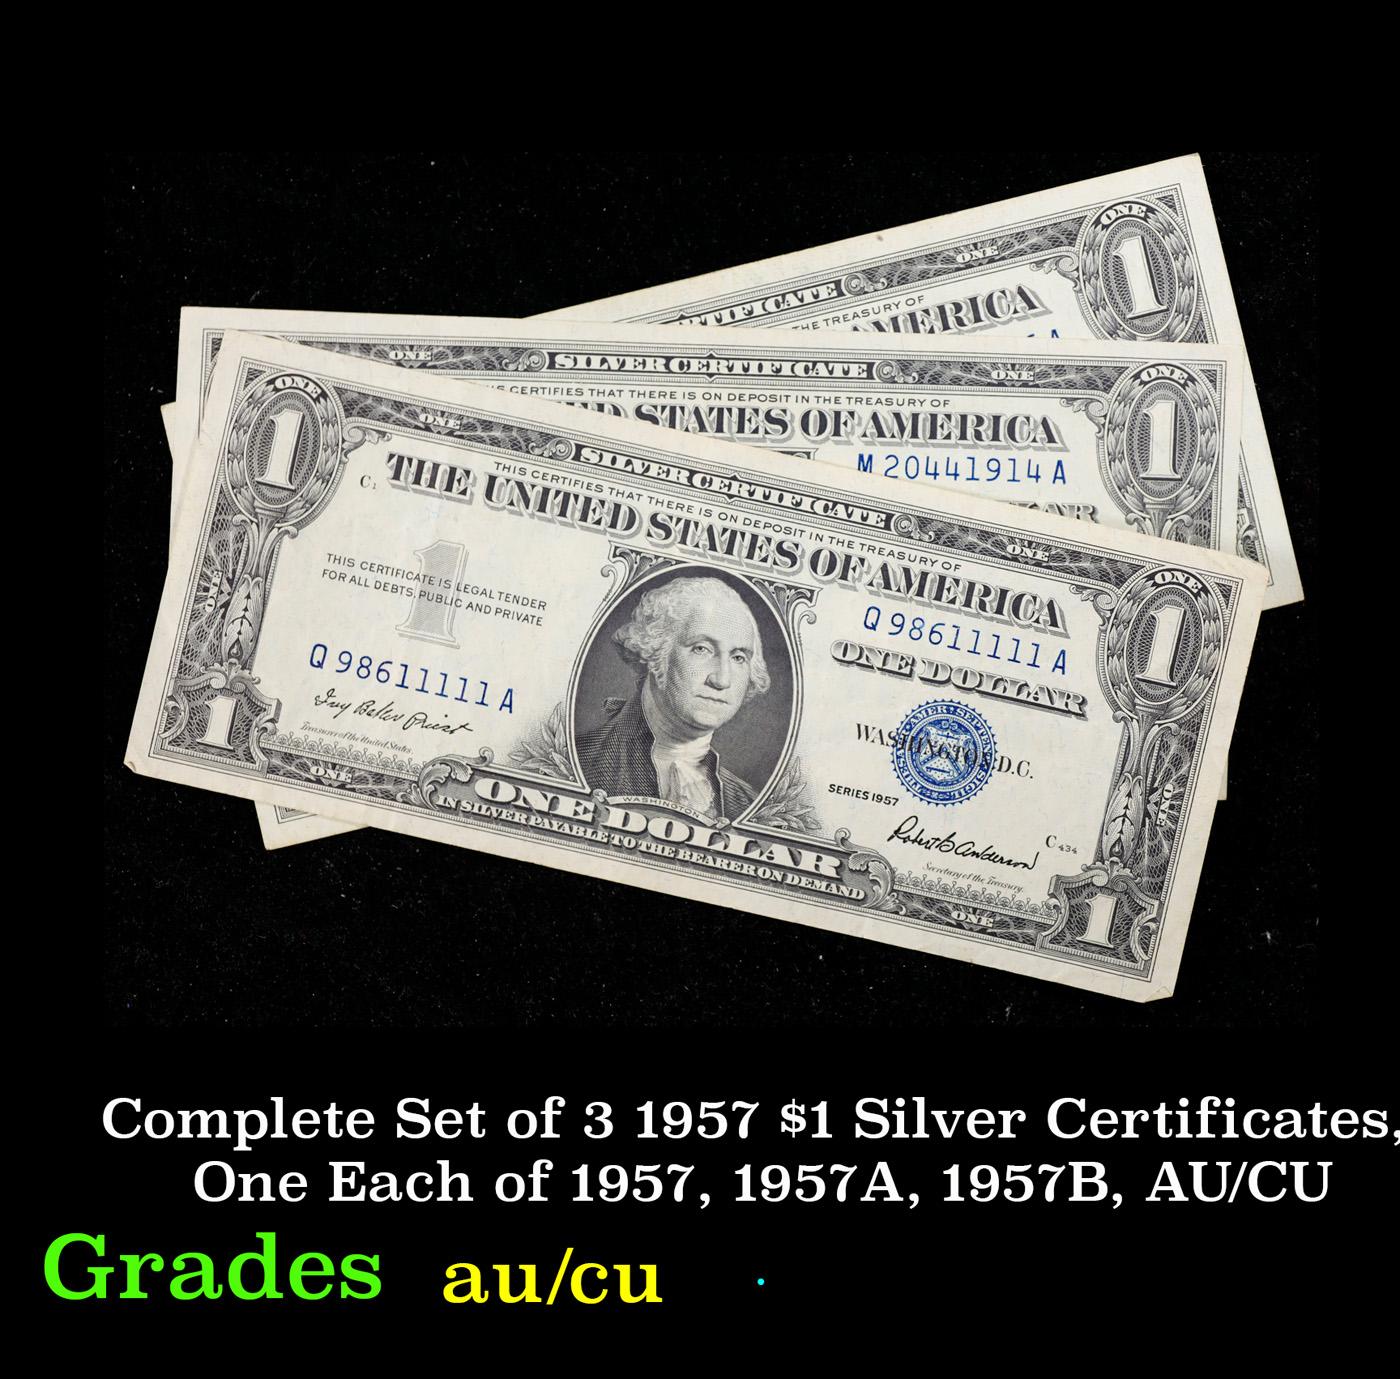 Complete Set of 3 1957 $1 Silver Certificates, One Each of 1957, 1957A, 1957B, AU/CU $1 Blue Seal Si